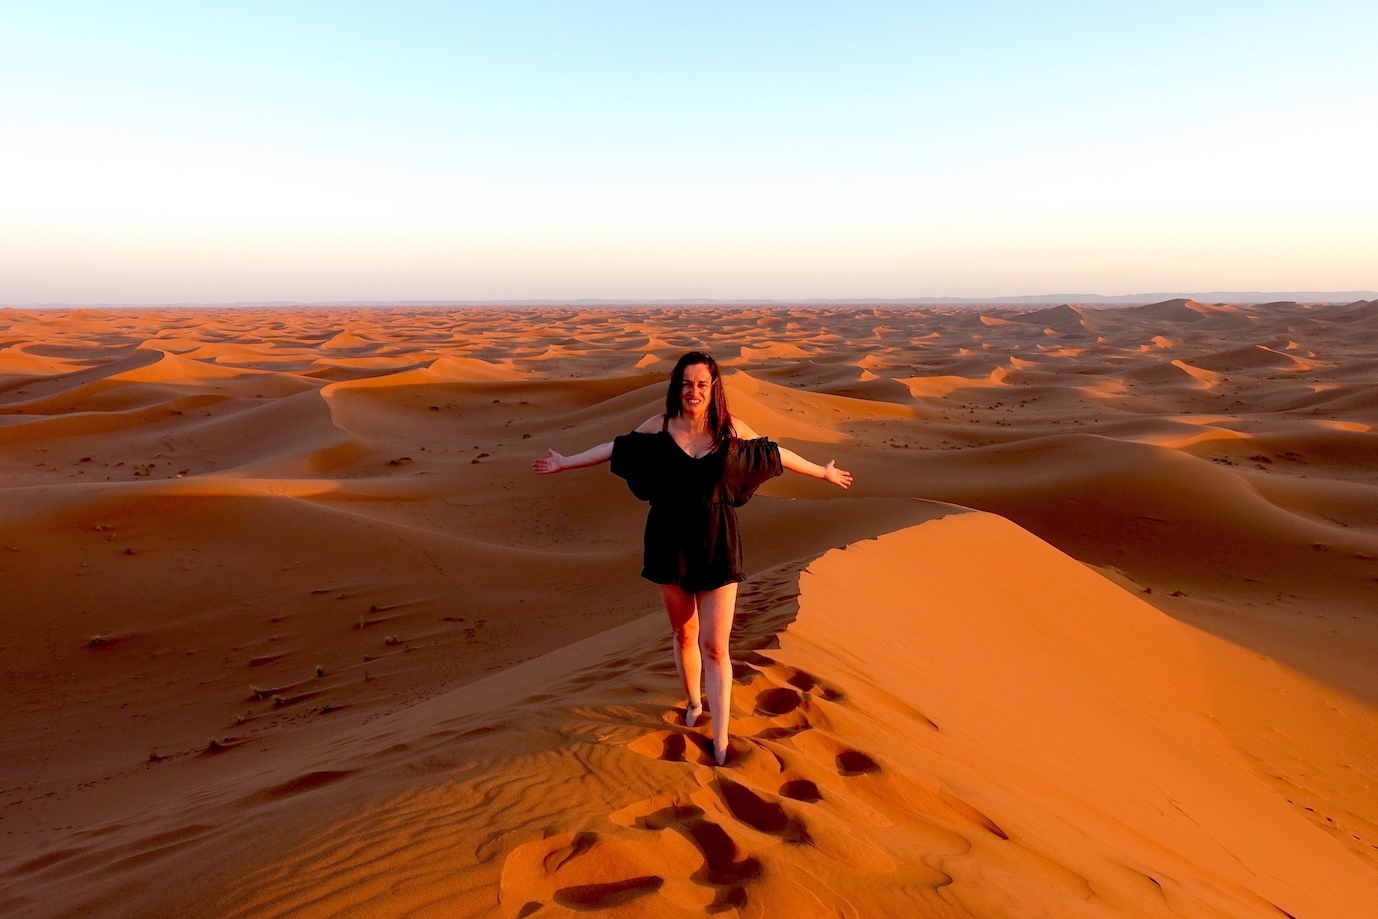 Pilar at the top of one of the Erg Chigaga dunes